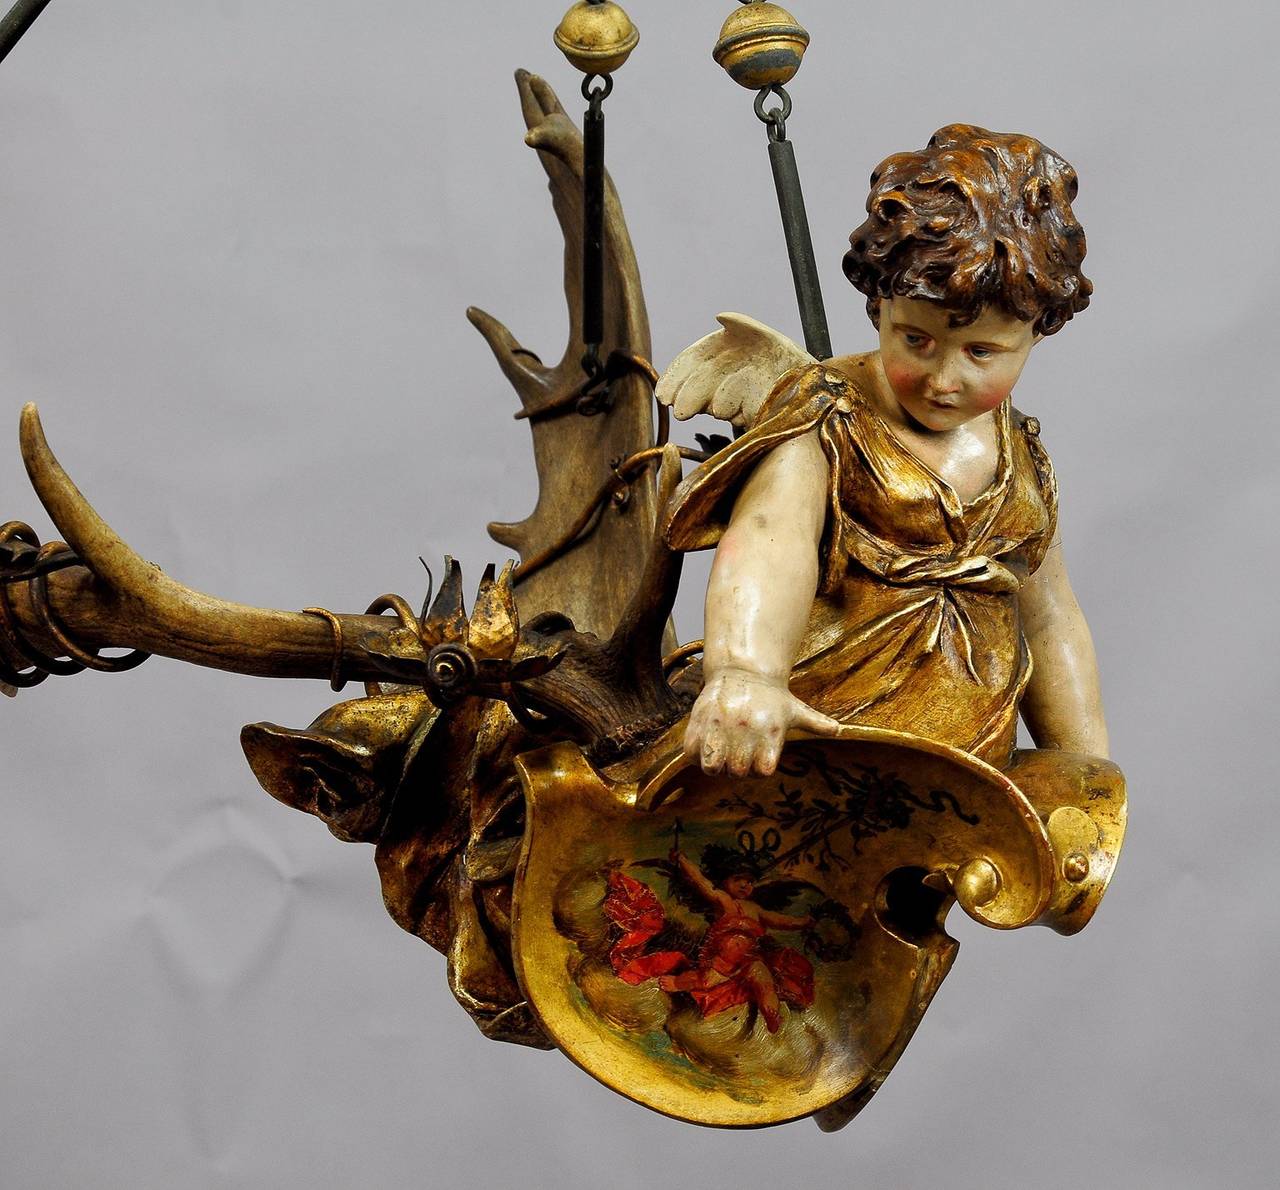 an antique statue of a cherub made of handpainted plaster - mounted on a pair of original fallow deer antlers. with 6 handforged and gilded iron candle holders. the angel is holding a pair of emblems with lovely angel paintings on them. executed ca.